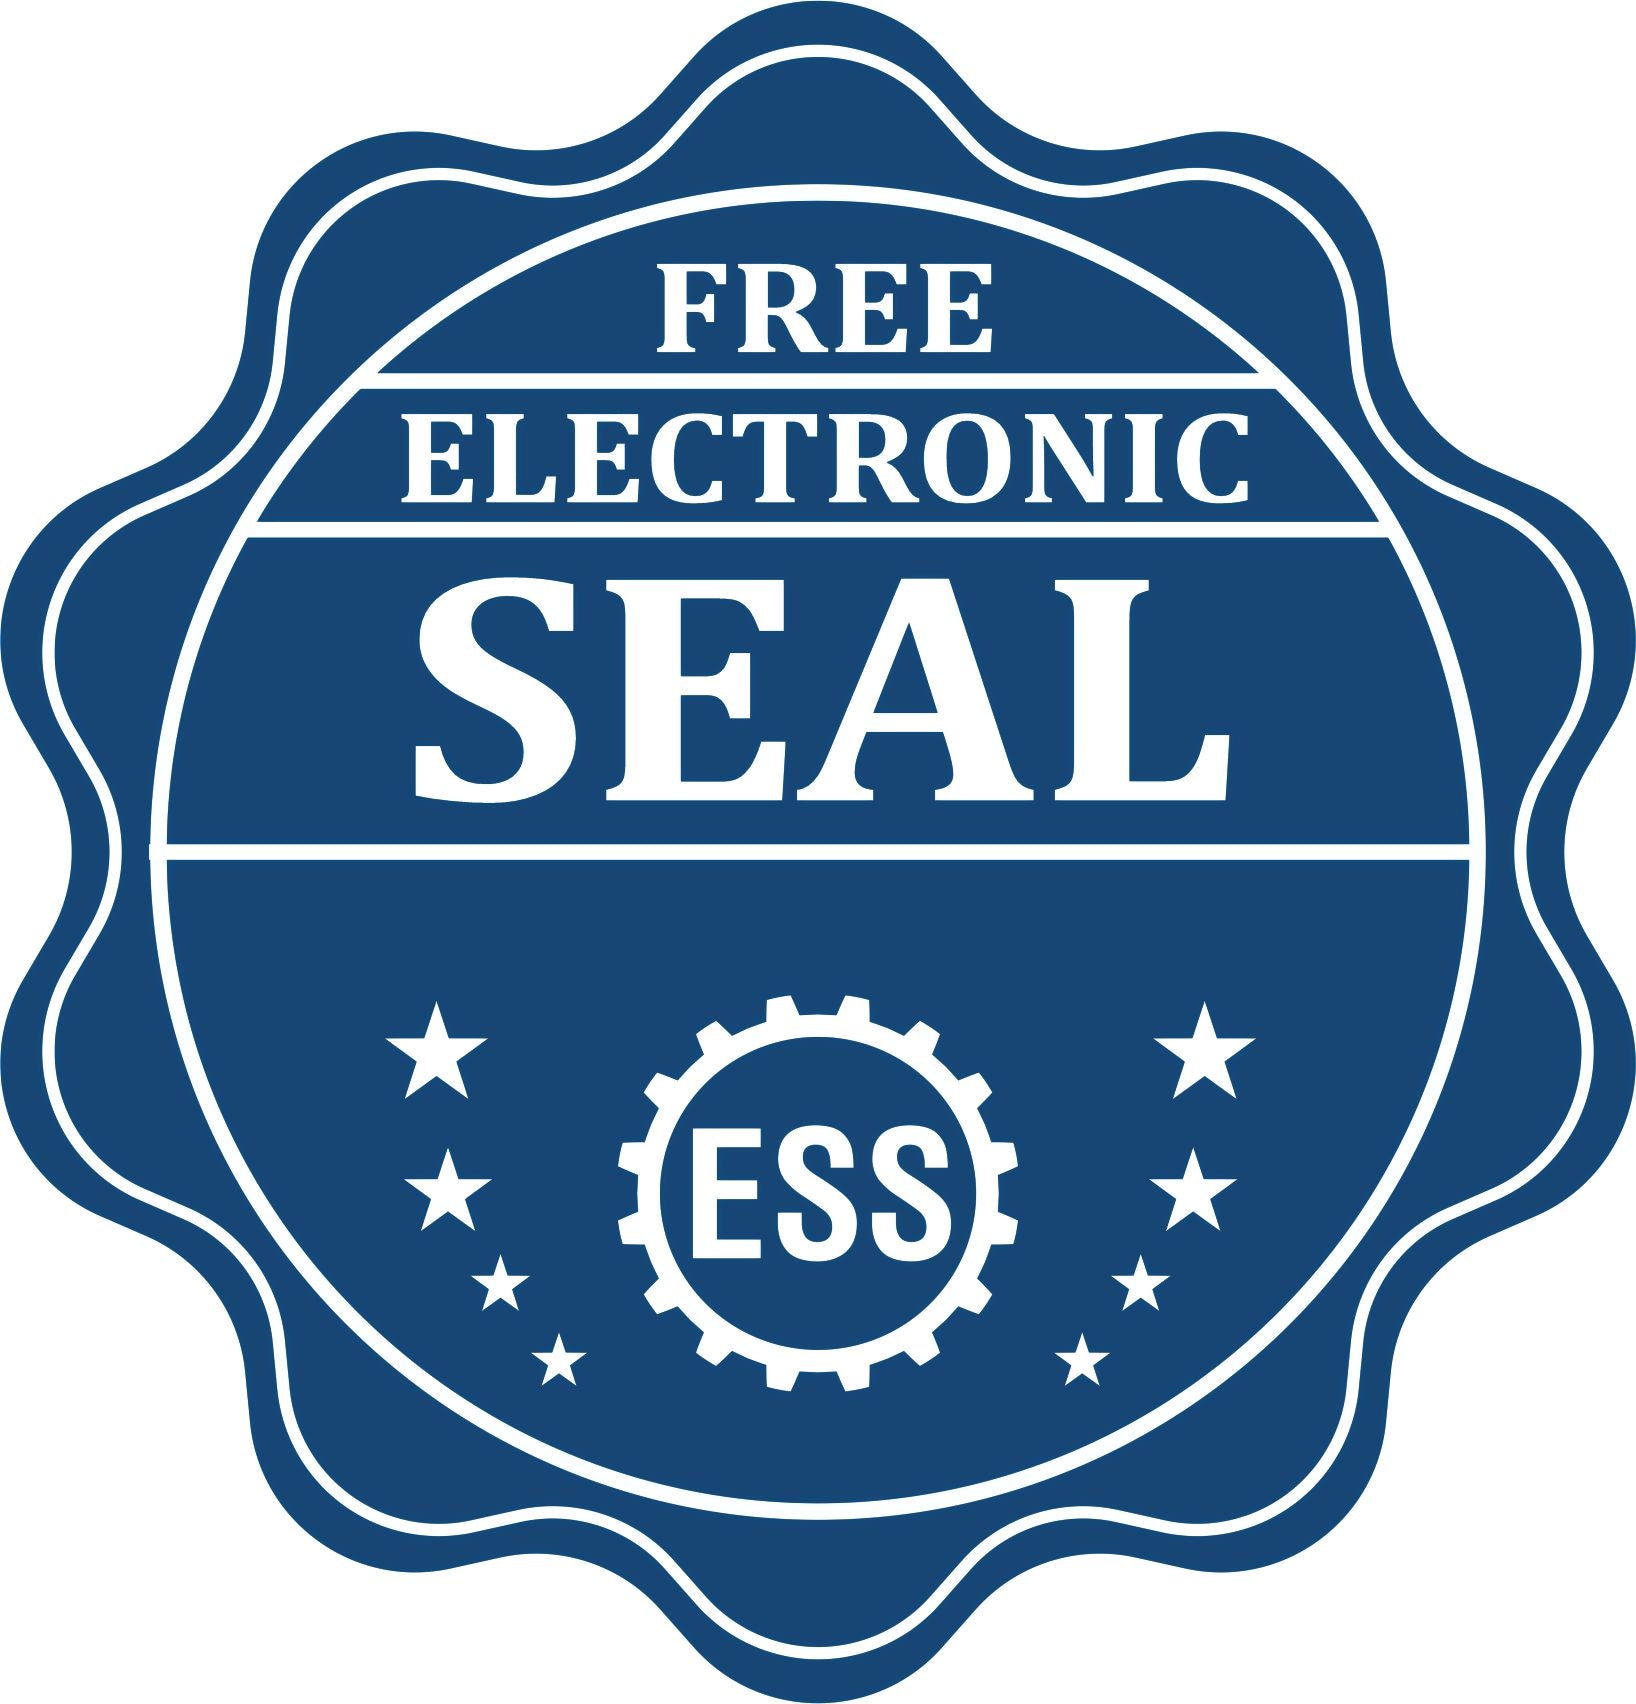 A badge showing a free electronic seal for the State of Iowa Long Reach Architectural Embossing Seal with stars and the ESS gear on the emblem.